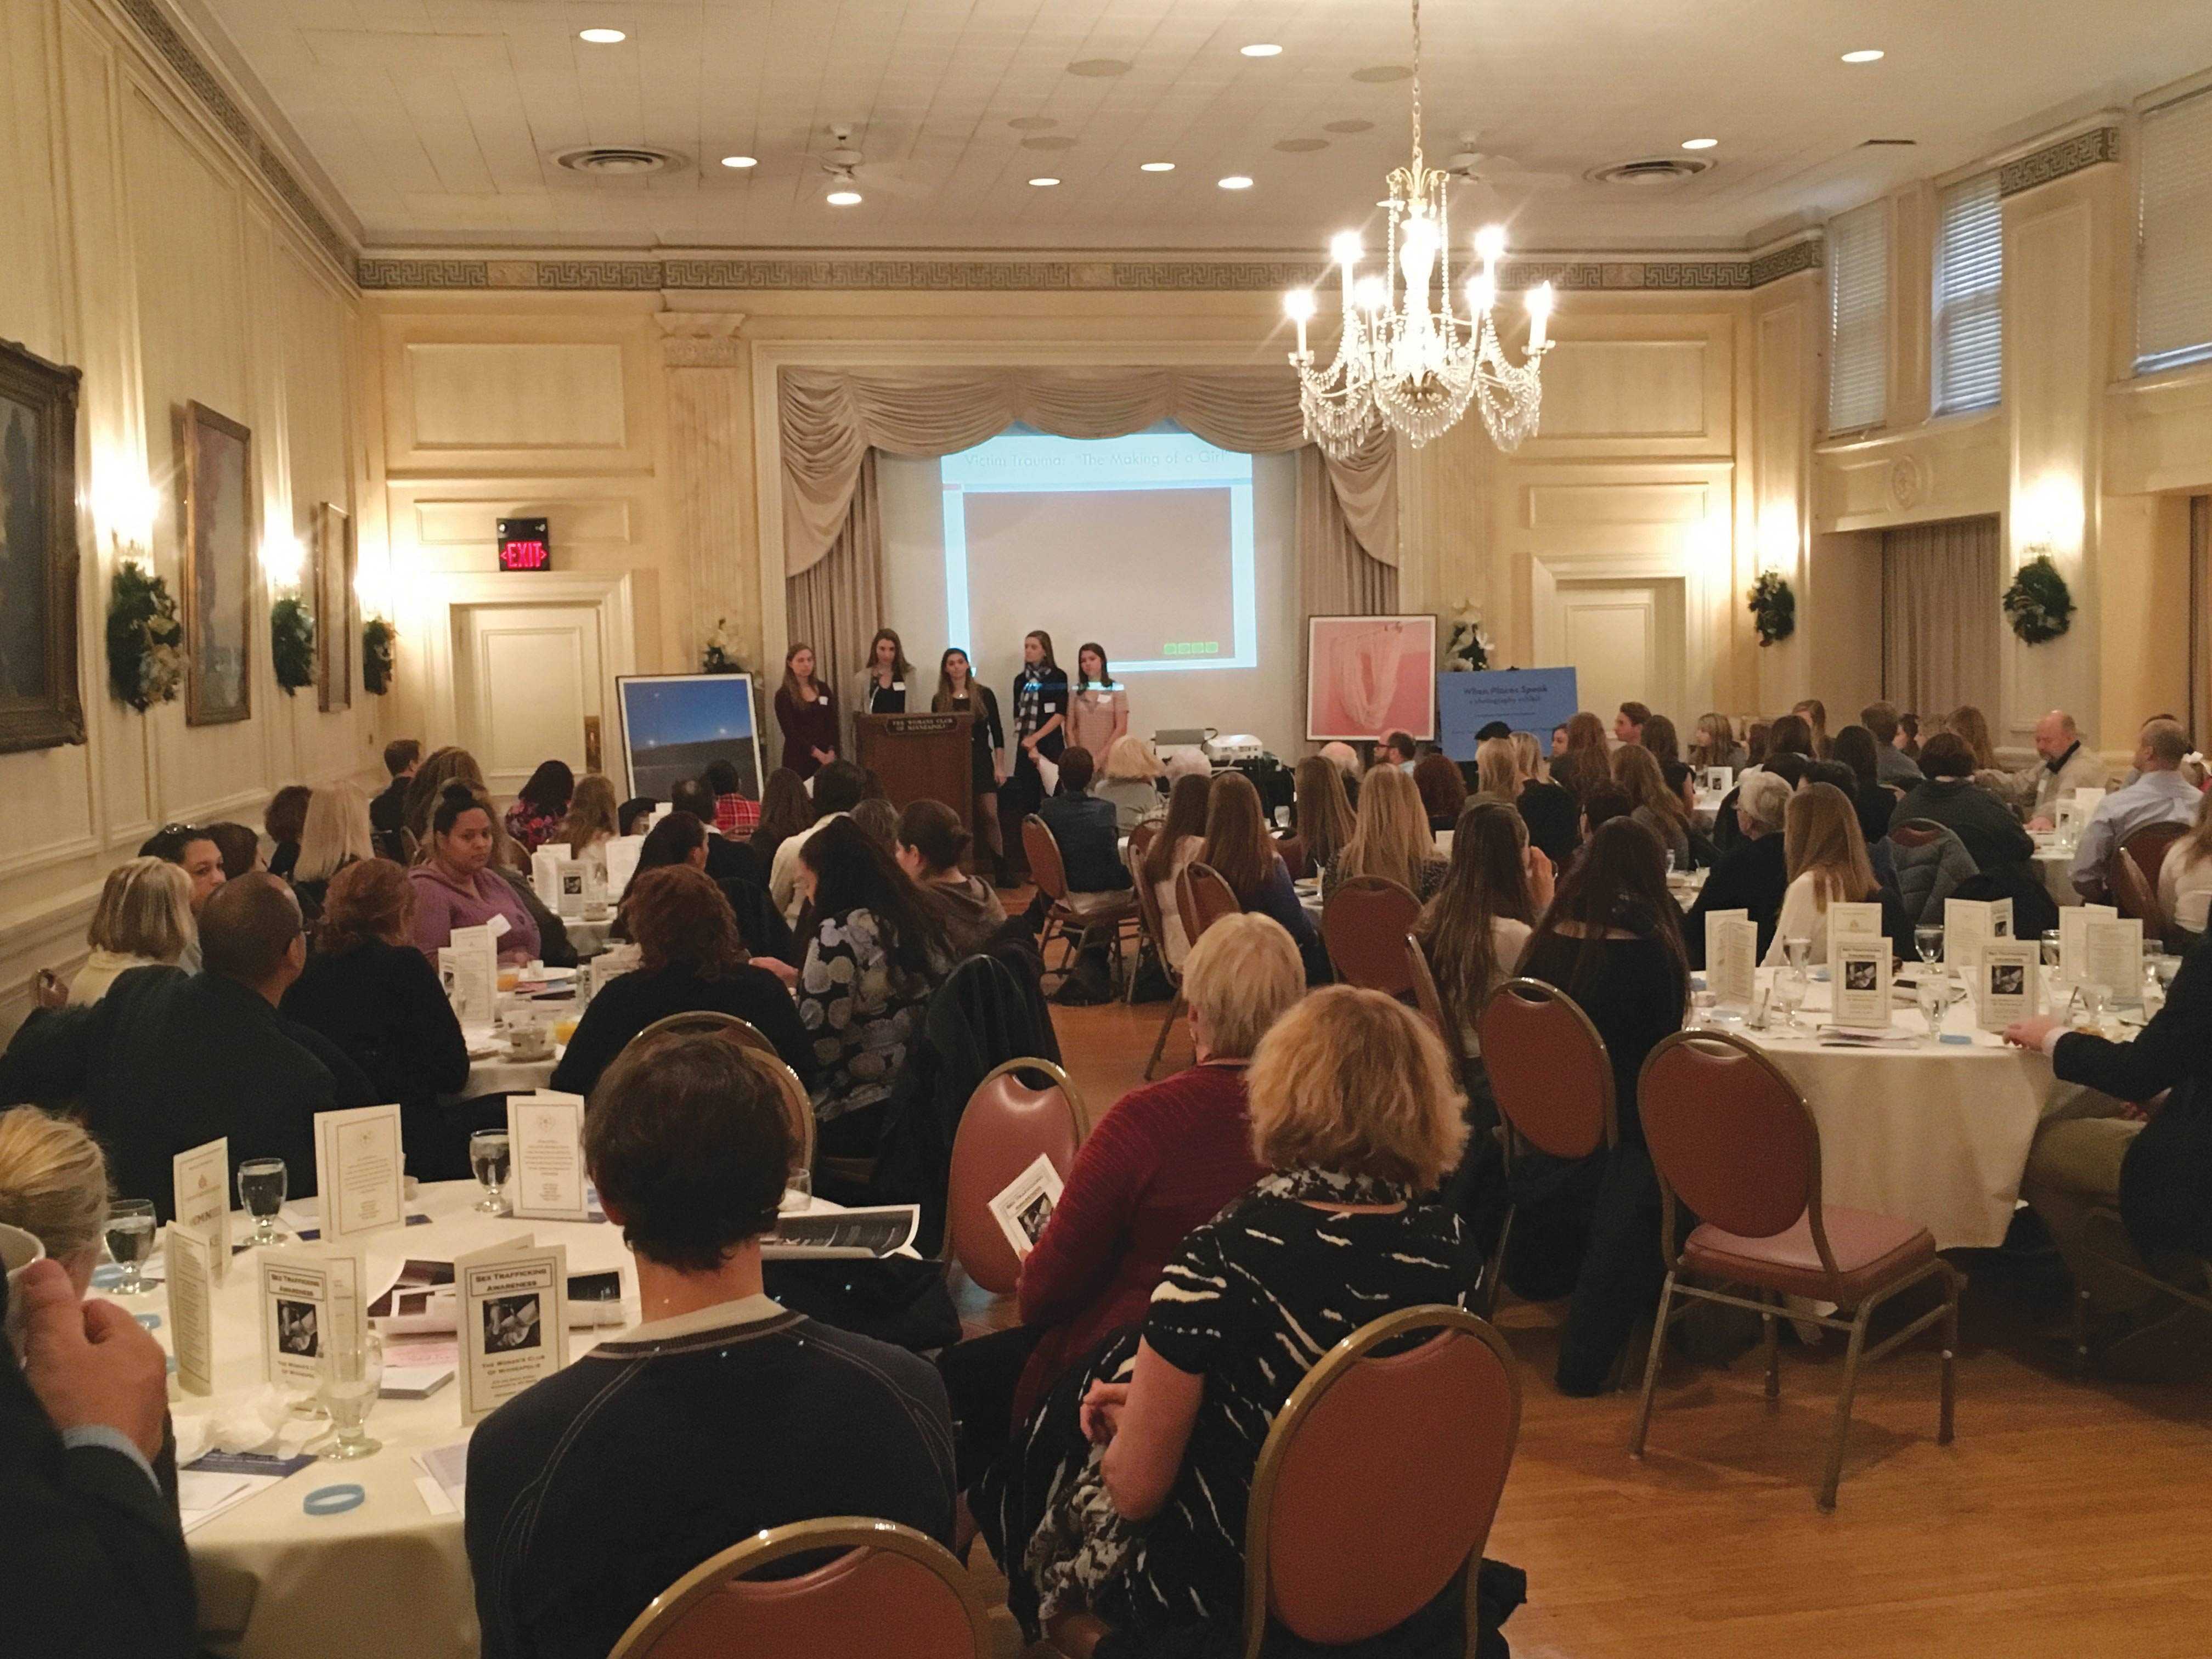 From left: Libby Rickeman ‘17, Sophie Smith ‘17, Raye Gleekel ‘17, Isabel Hall ‘16, and Lucy Burton ‘17 present to a crowd of over 100 on sex trafficking awareness.